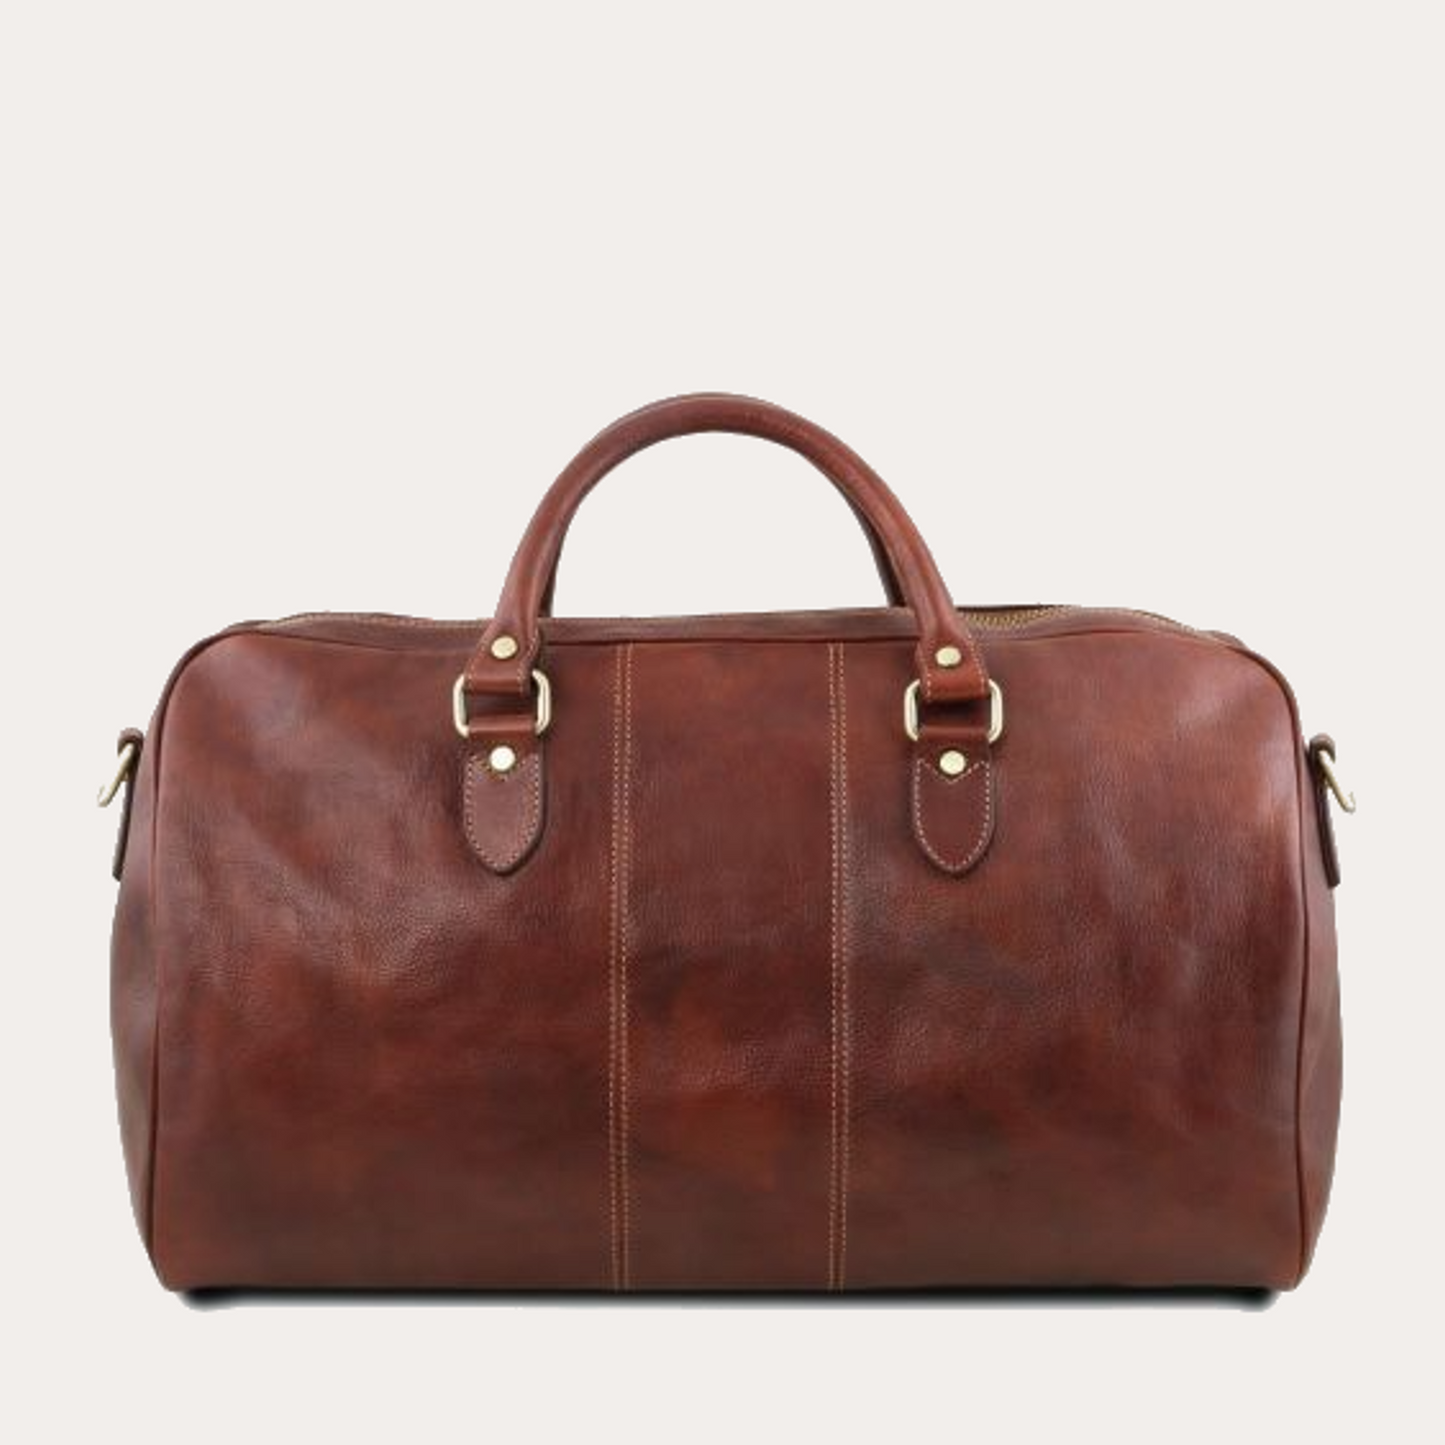 Tuscany Leather Brown Leather Travel Bag-Large Size